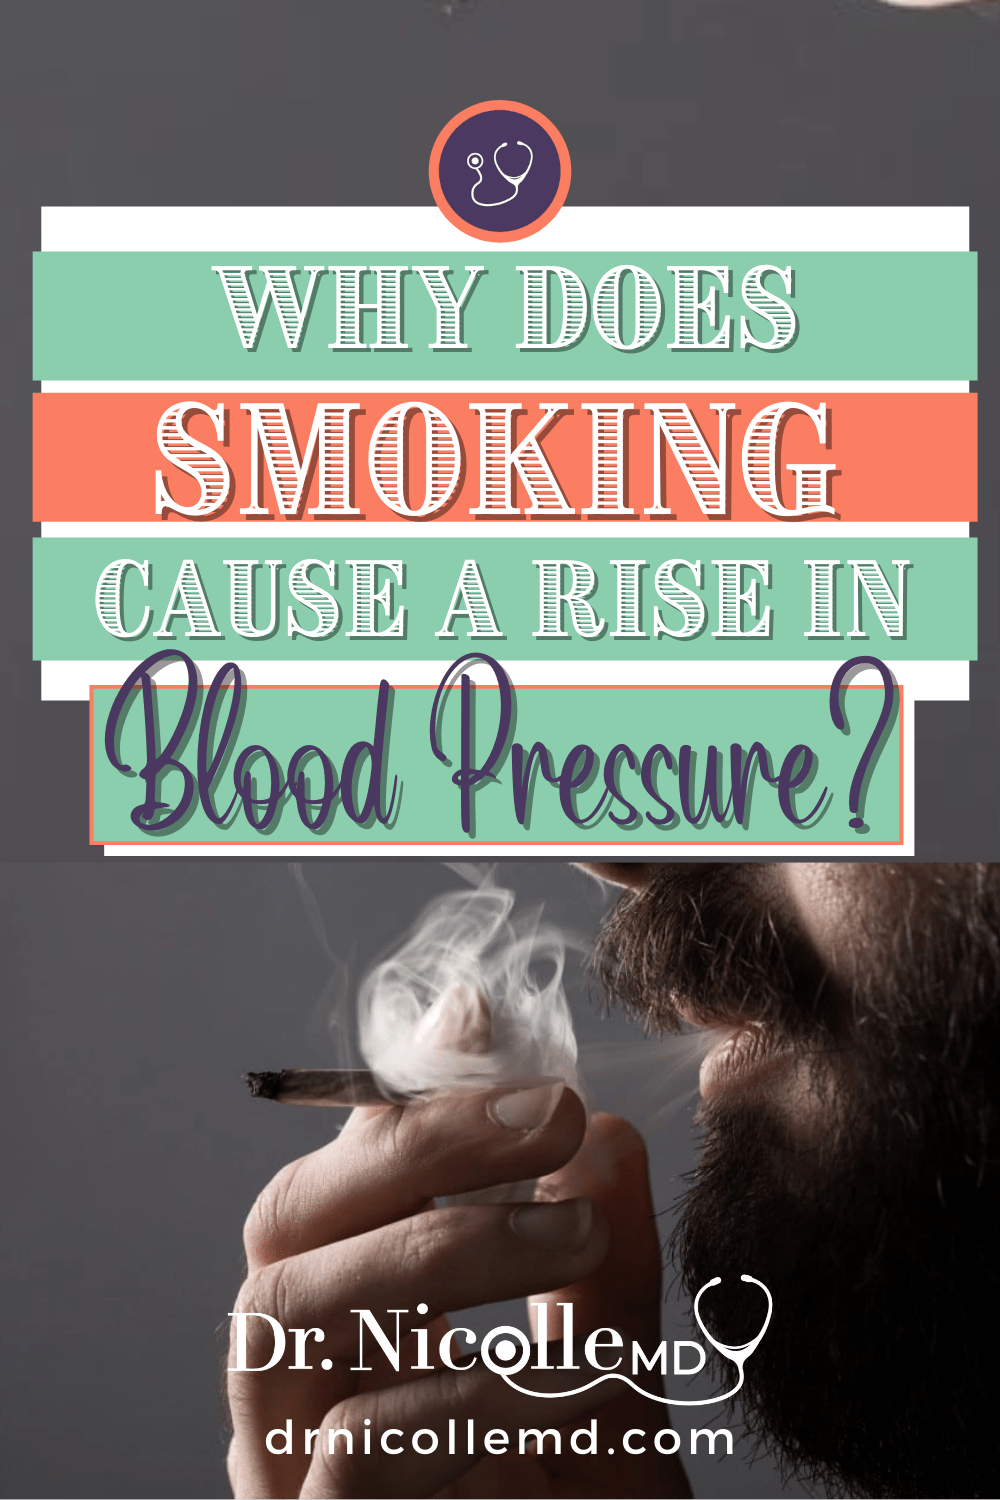 Why Does Smoking Cause A Rise In Blood Pressure?